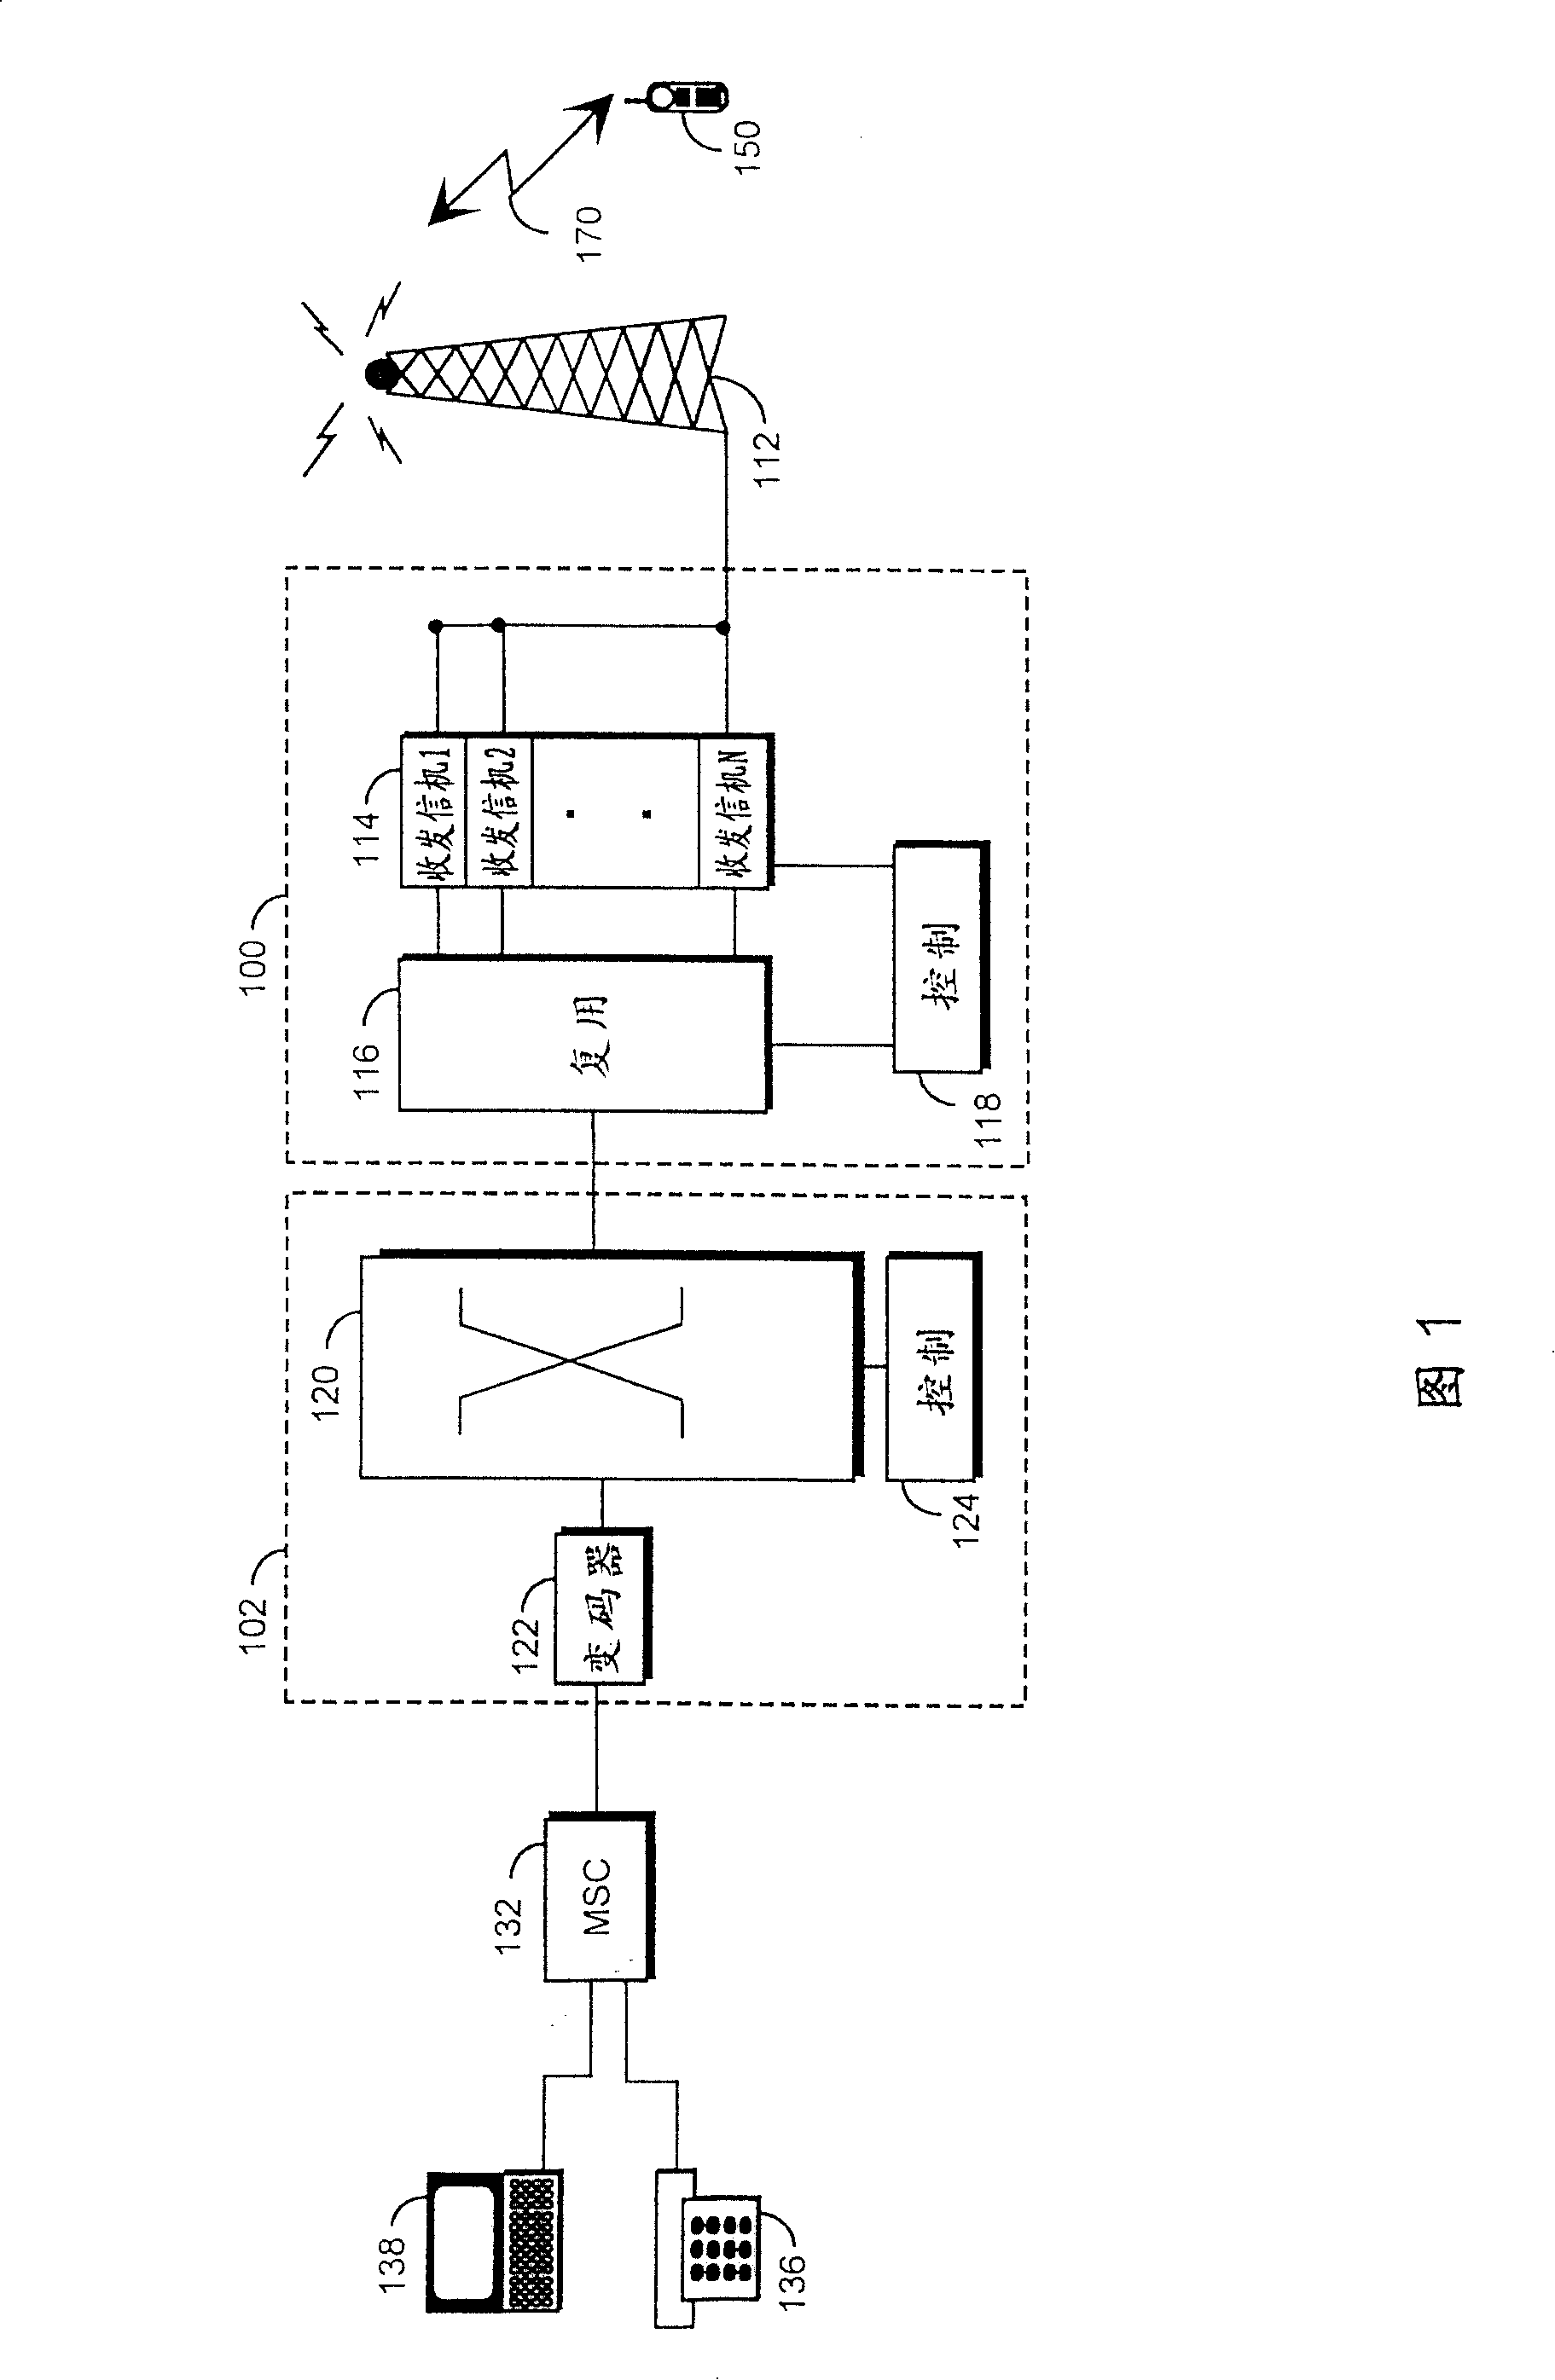 Method of physical radio channel power control